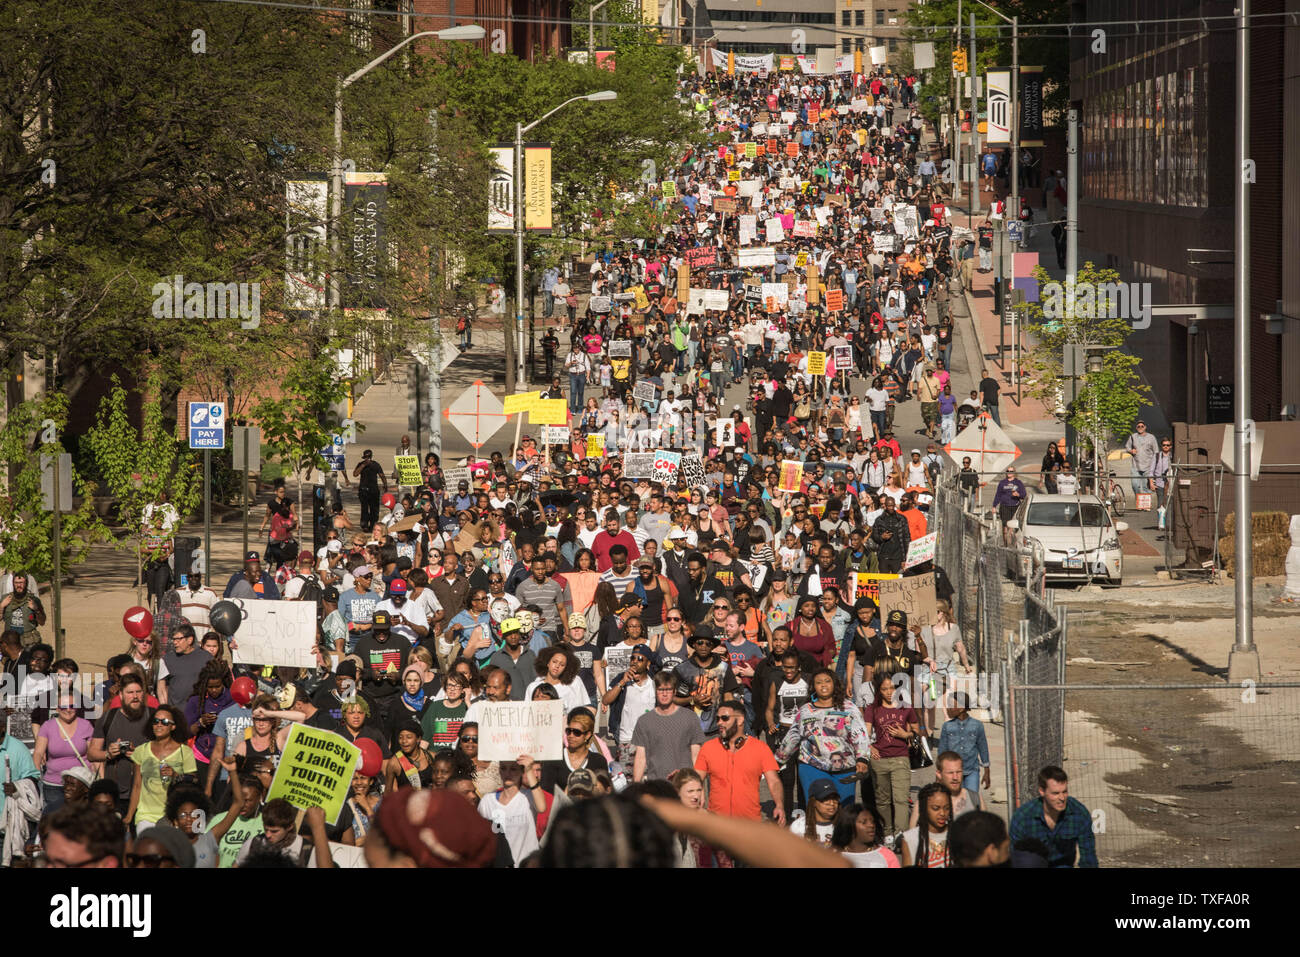 Baltimore residents march in a Massive National Rally of celebration in the streets of Baltimore, MD on May 2, 2015. City State's Attorney ruled the day before that Gray's death was a homicide and that criminal charges would be filed. Gray, 25 was arrested April 12 for possessing a switch blade knife near the Gilmore Housing project. Gray died a week later from a severe spinal cord injury received while in police custody.     Photo by Ken Cedeno/UPI Stock Photo